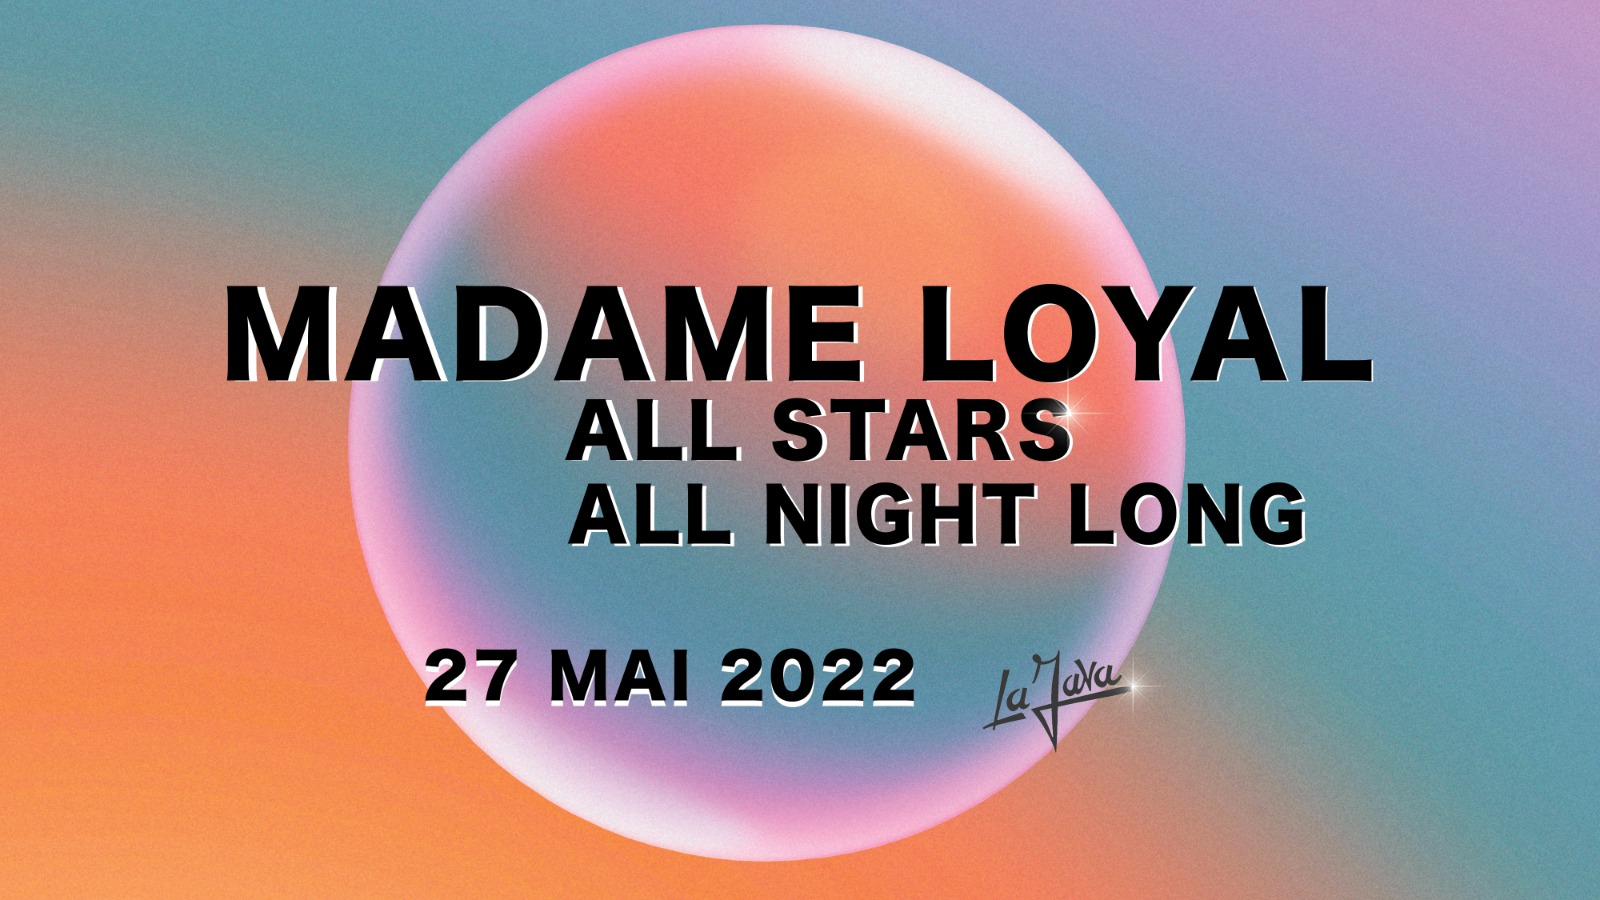 Madame Loyal All Stars (All Night Long) - Flyer front